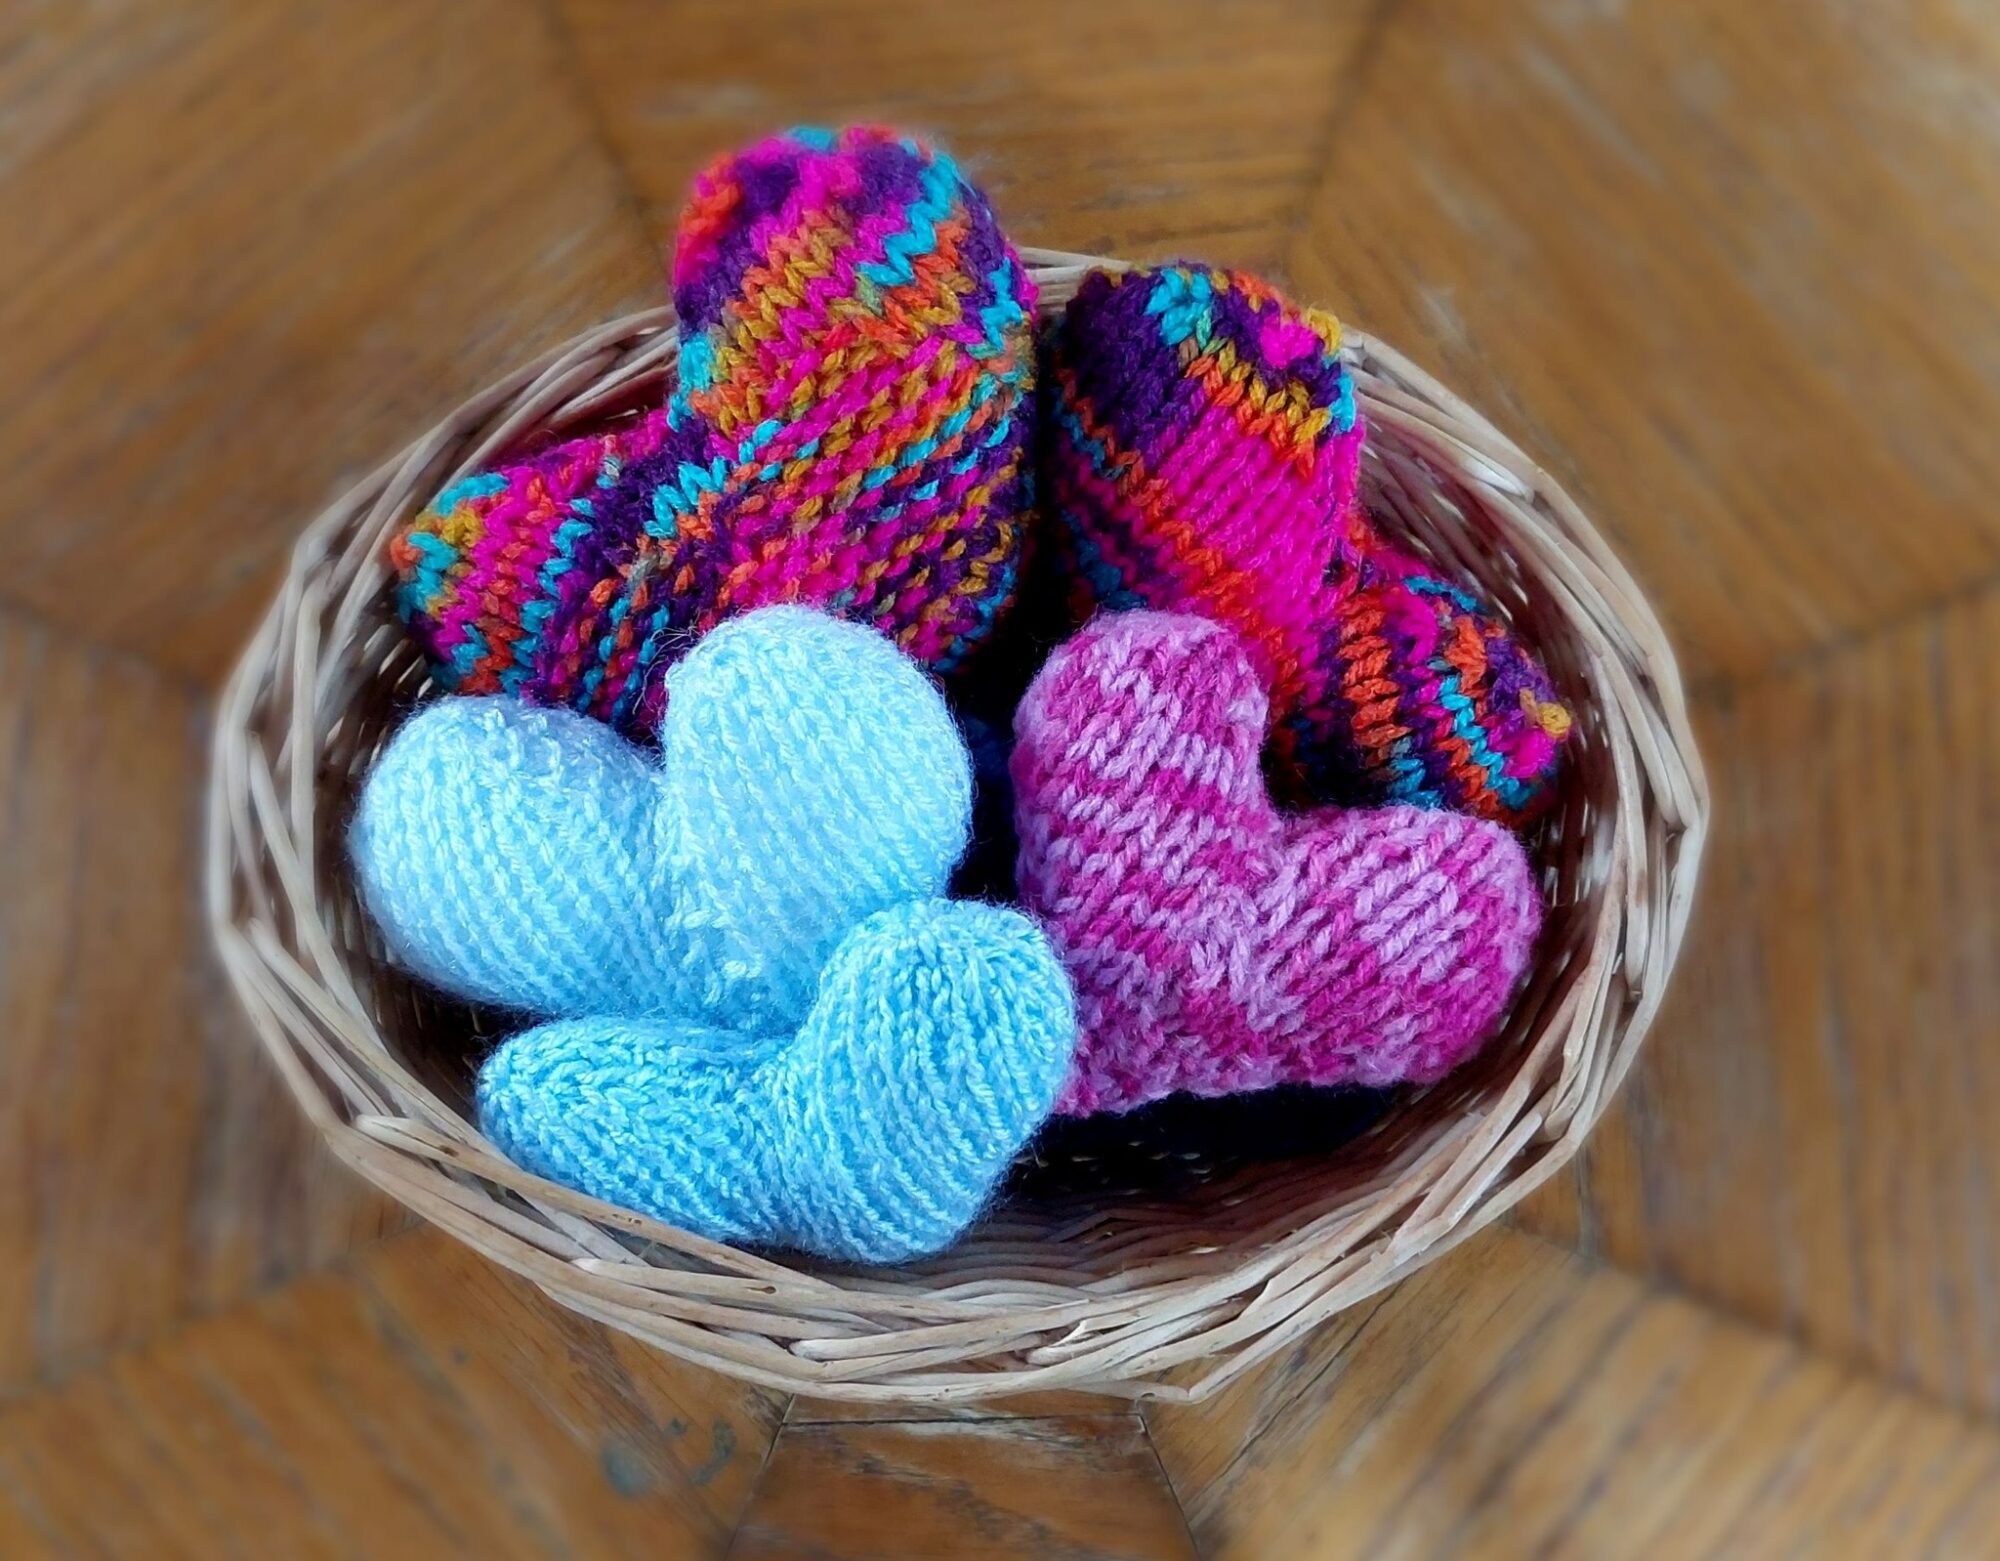 Some knitted hearts in a wicker basket.